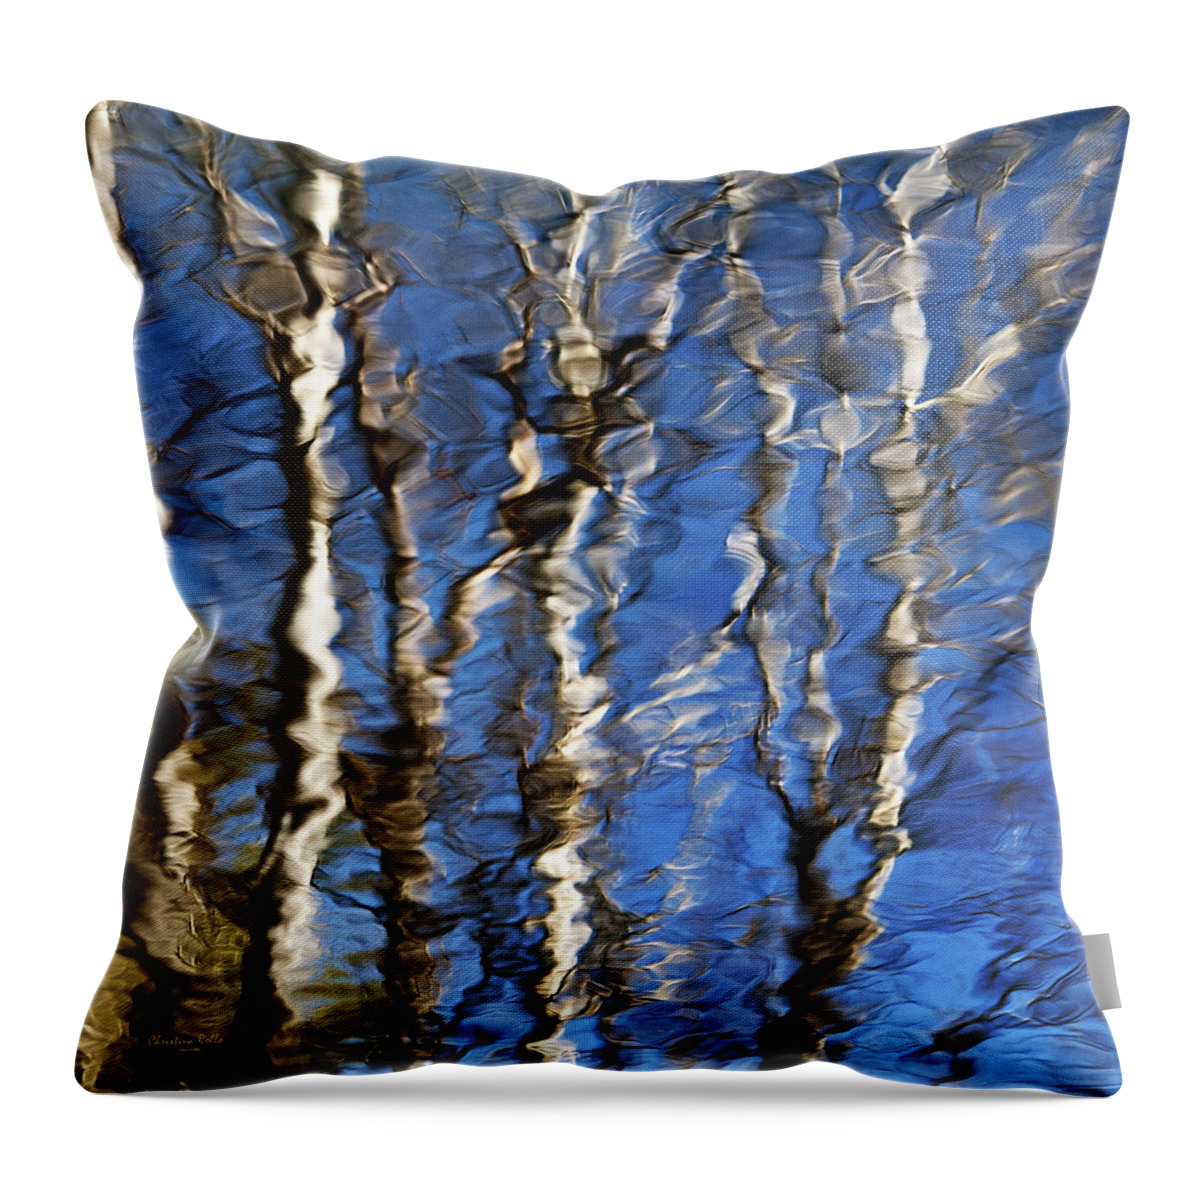 Water Reflection Throw Pillow featuring the photograph Water Reflection Aspen Trees by Christina Rollo